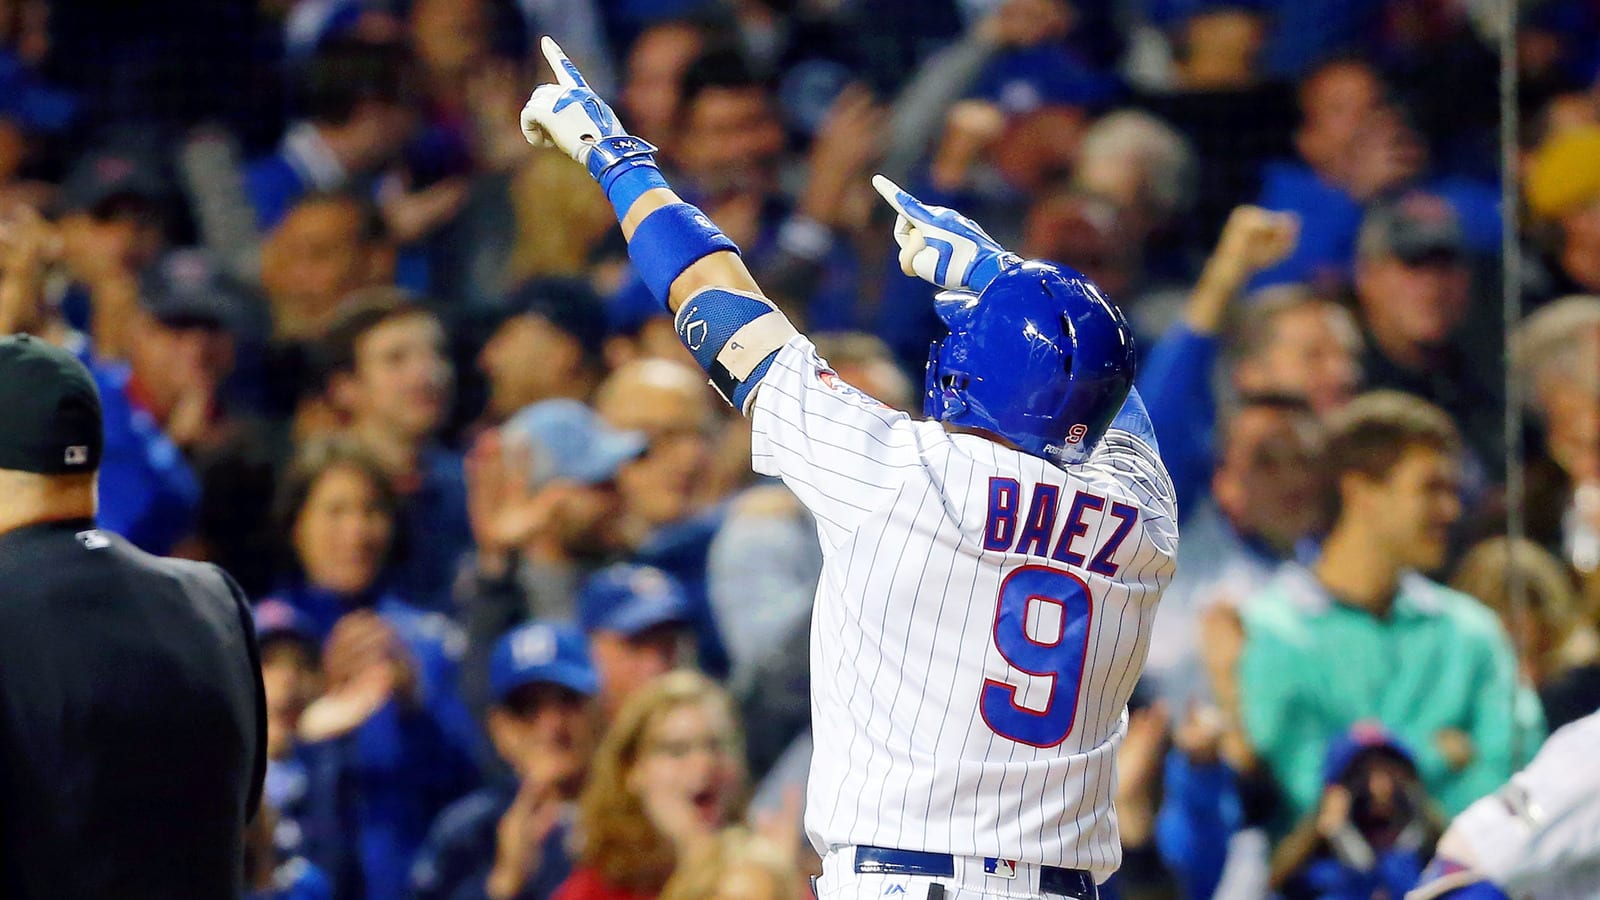 Javier Baez home run wins it for the Cubs and Bill Murray loved it